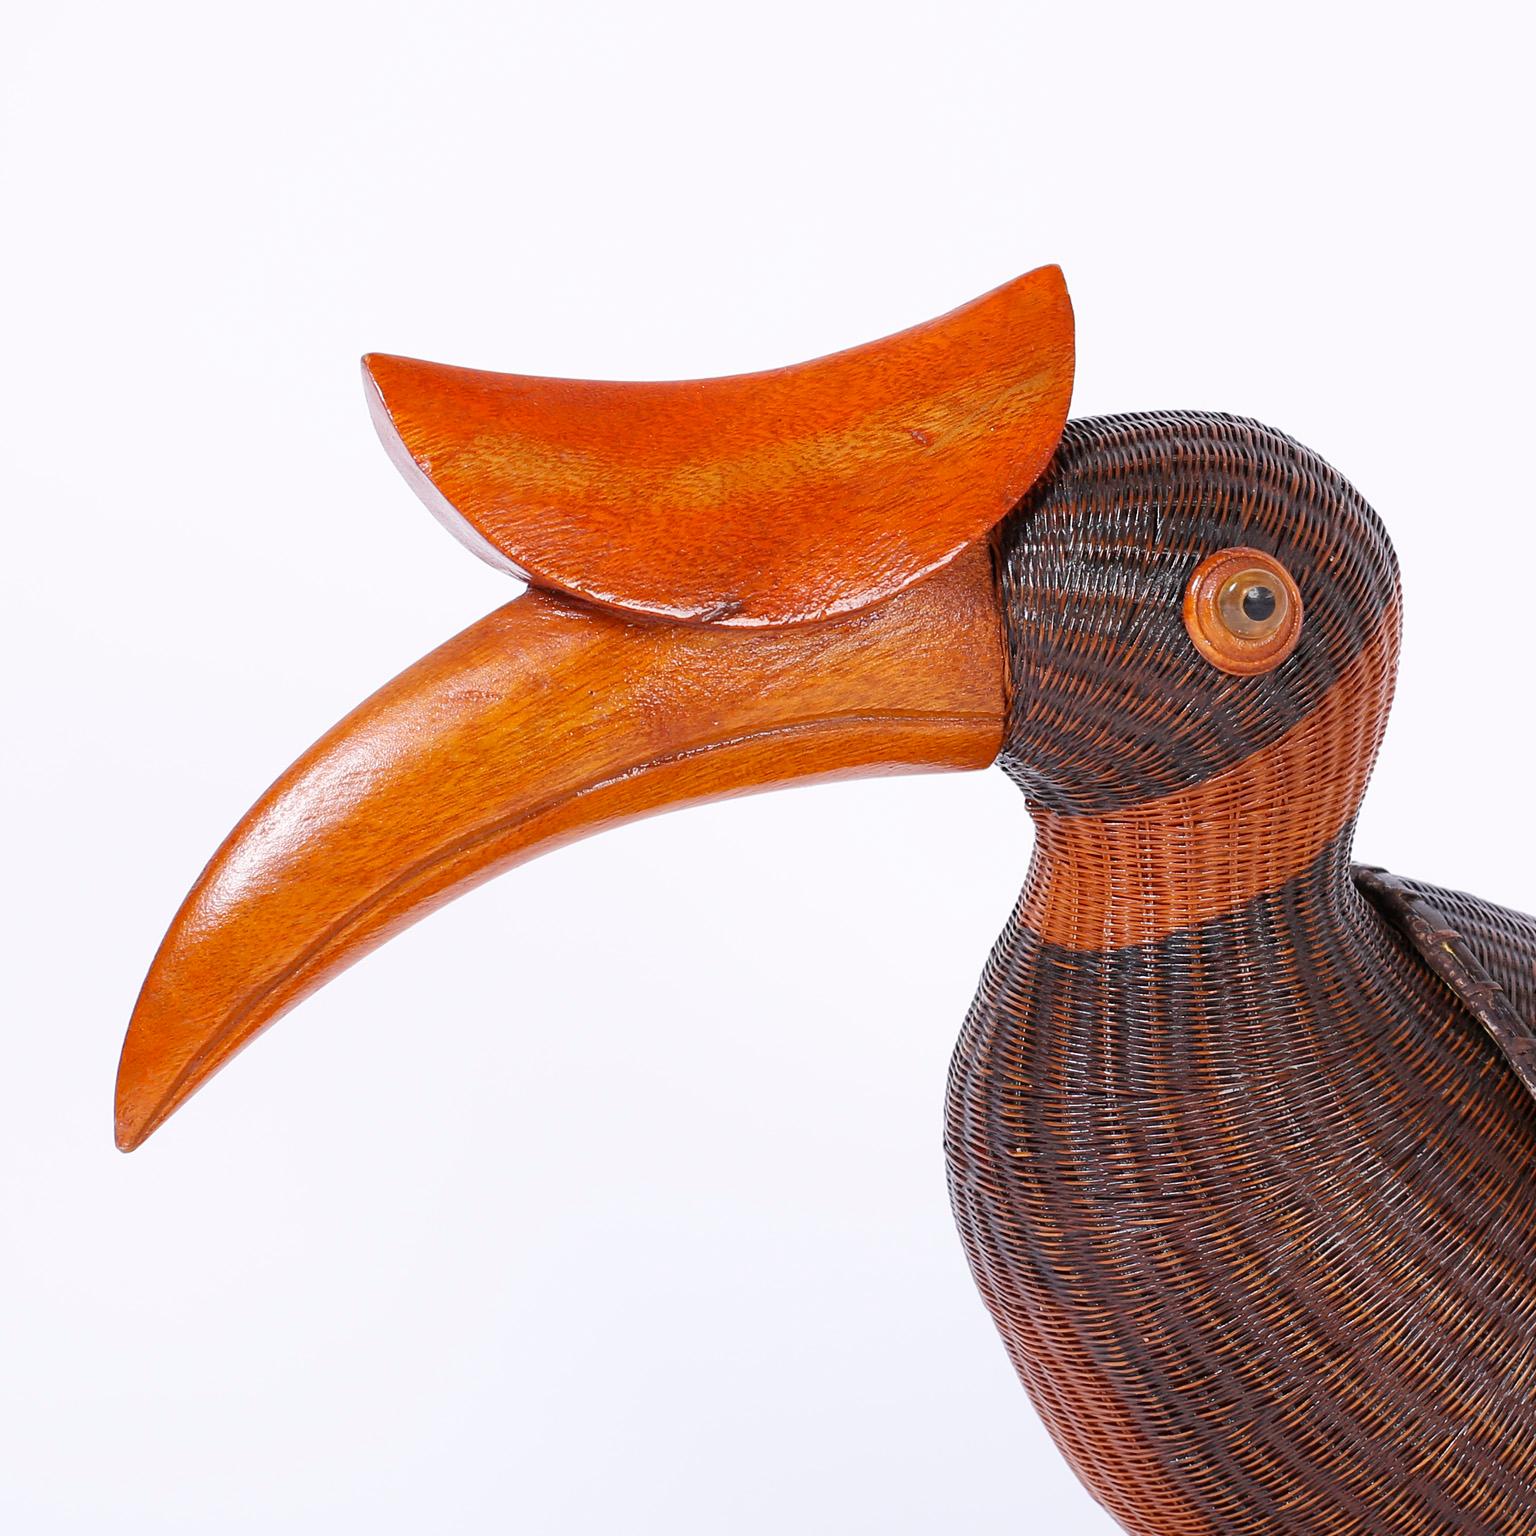 Whimsical wicker Chinese lidded toucan from the famed Shanghai collection with its distinctive intricate weave embellished with a carved wood beak and tail feathers. All perched on a bamboo base.